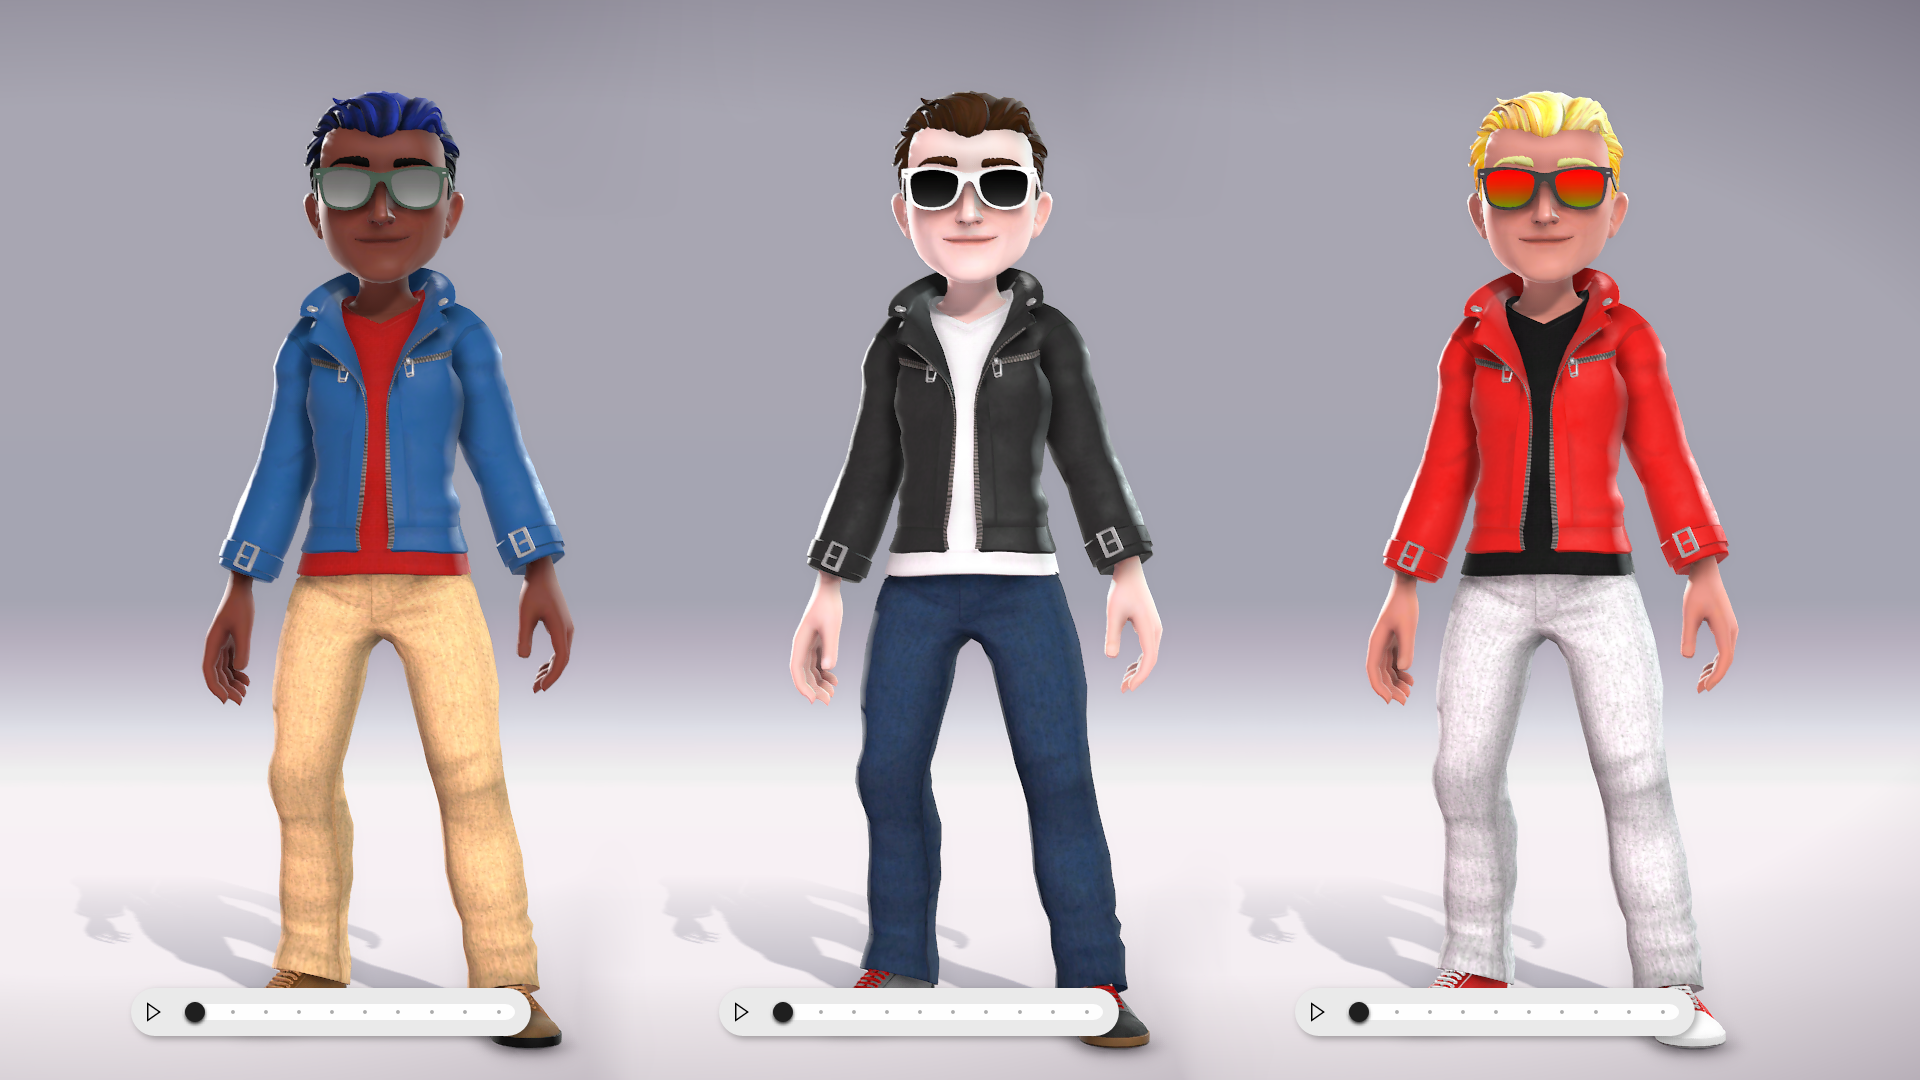 Xbox unveils new avatars designed to be more inclusive Express & Star